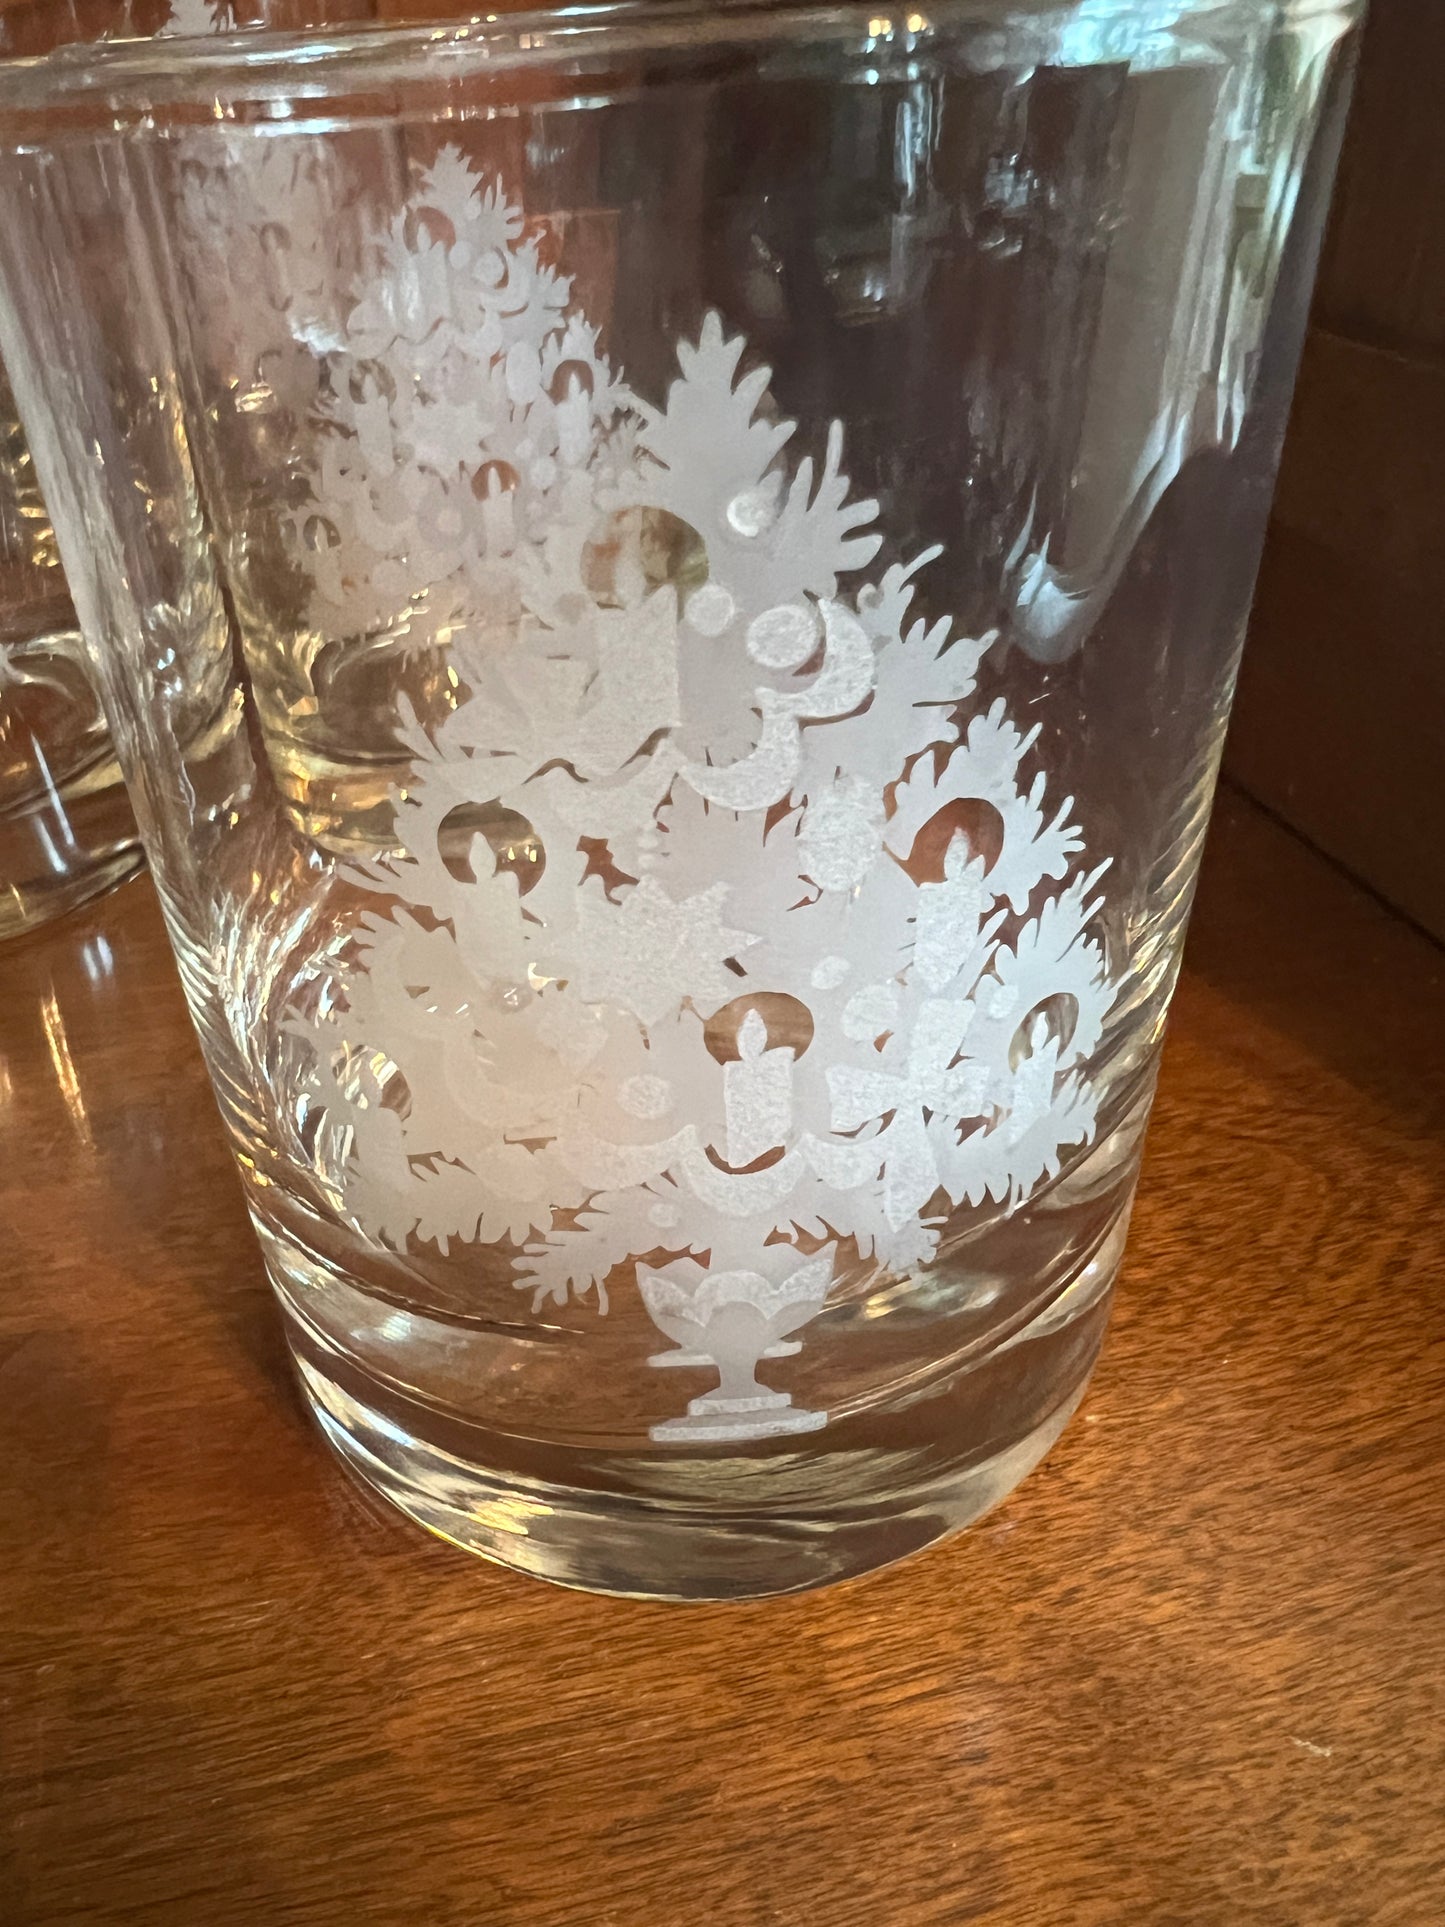 Neiman Marcus Etched Christmas Tree Tumblers (7)